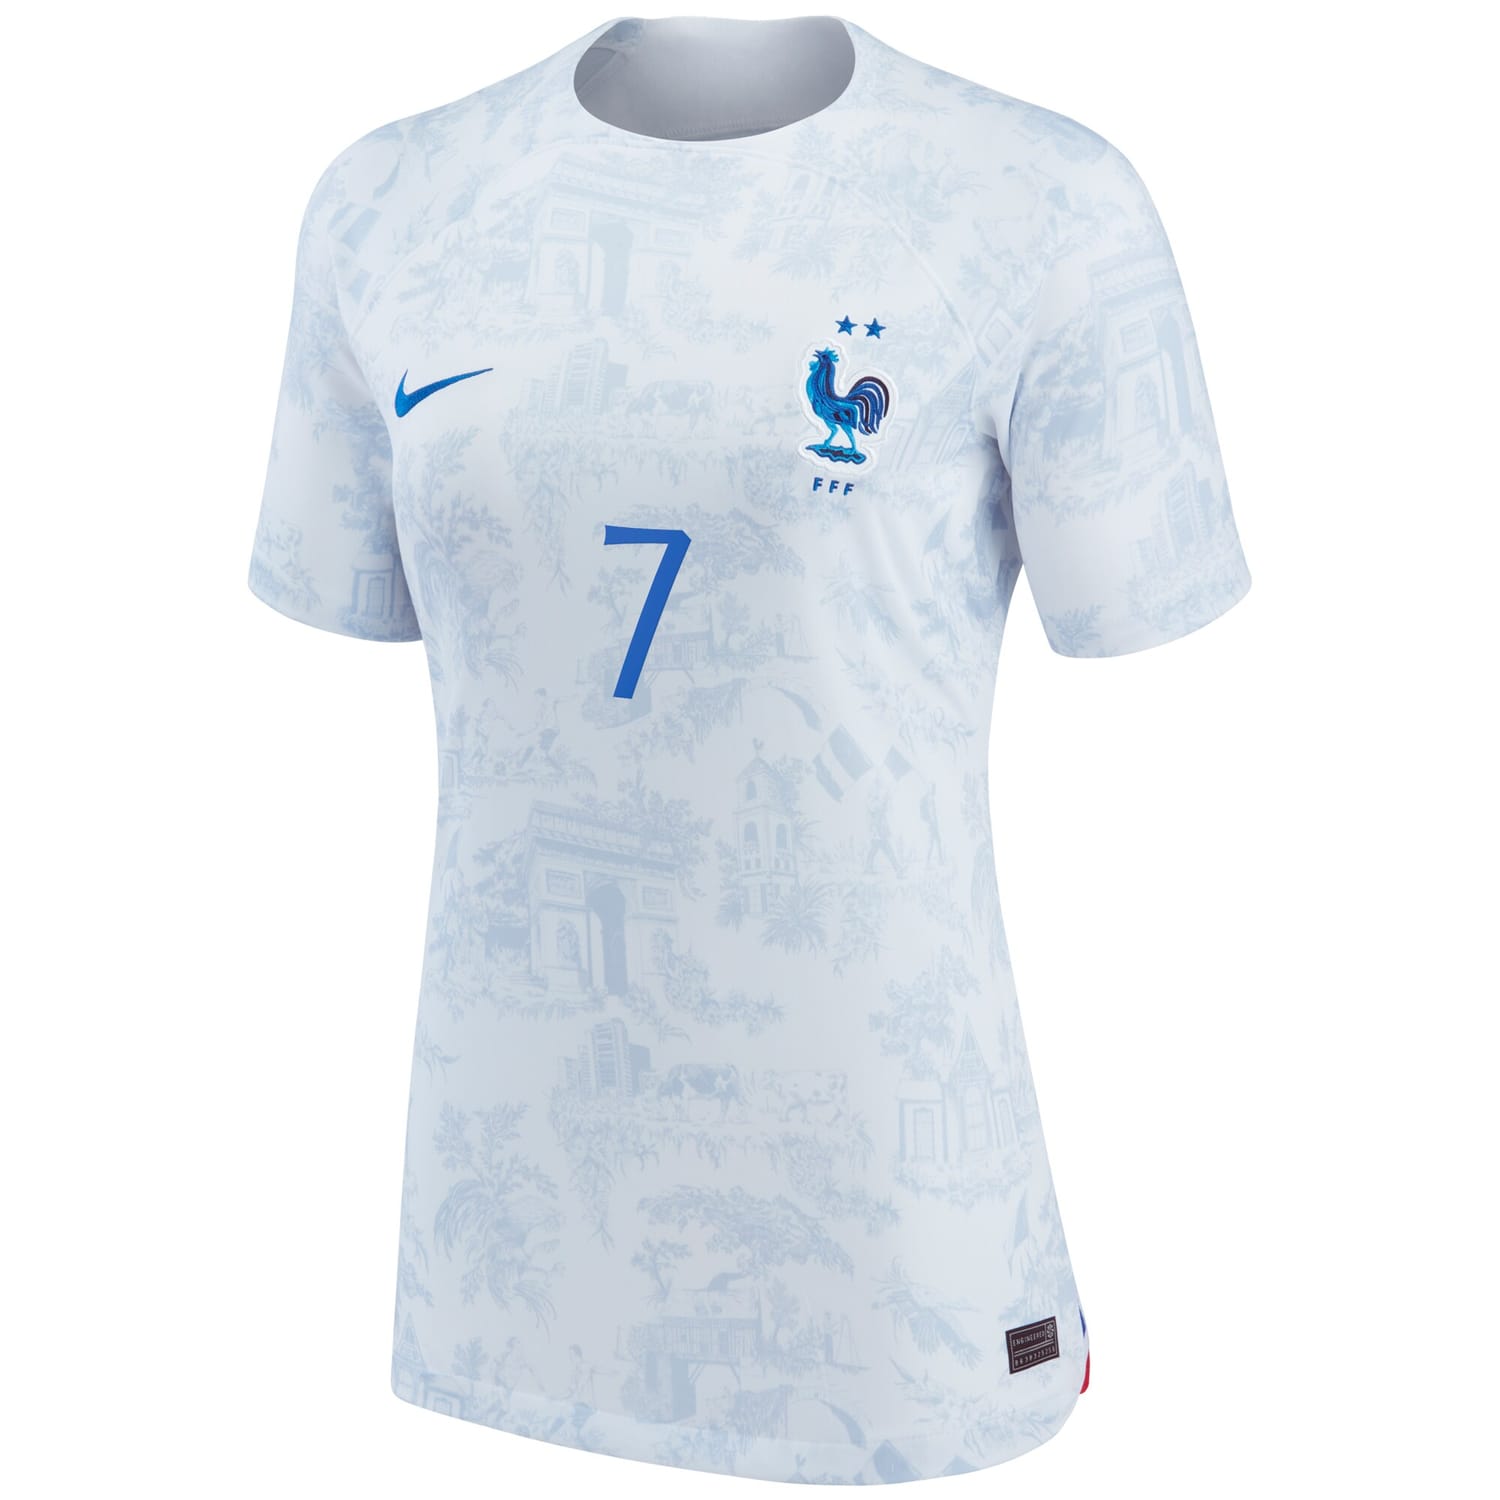 France National Team Away Jersey Shirt White 2022-23 player Antoine Griezmann printing for Women